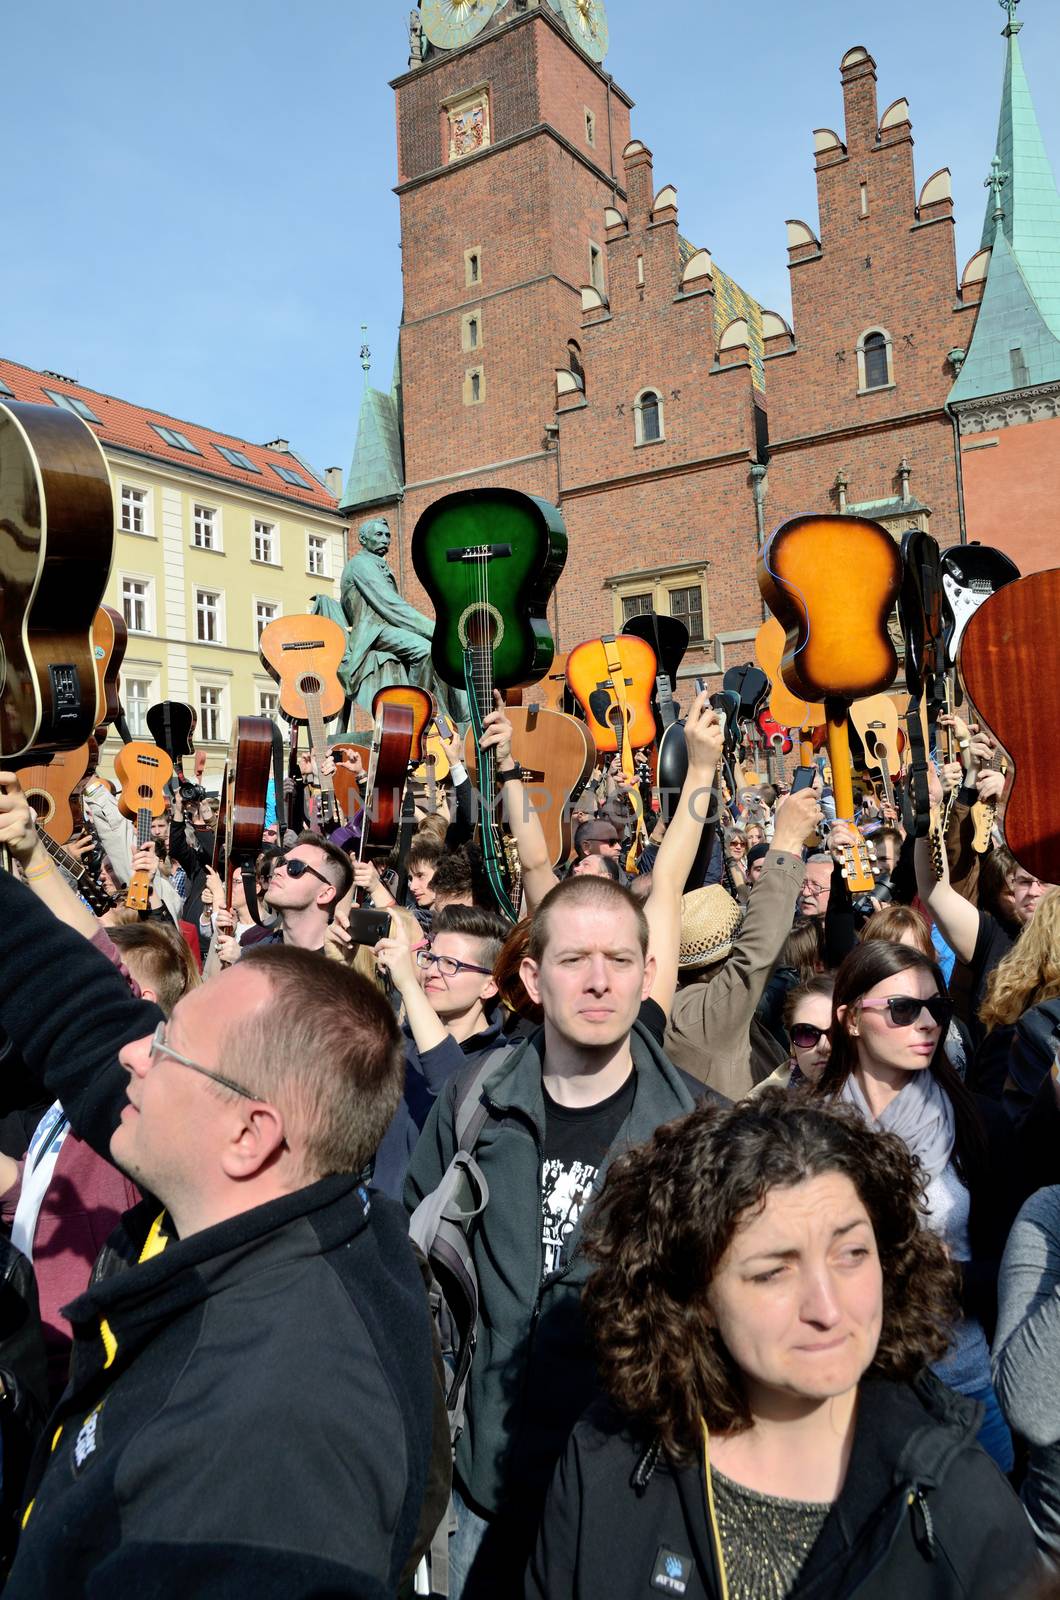 WROCLAW, POLAND - MAY 1: Over 7 thousands guitarists achieve new Guiness Record playing Hey Joe during Thanks Jimi Festival on 1st May 2016 in Wroclaw, Poland.